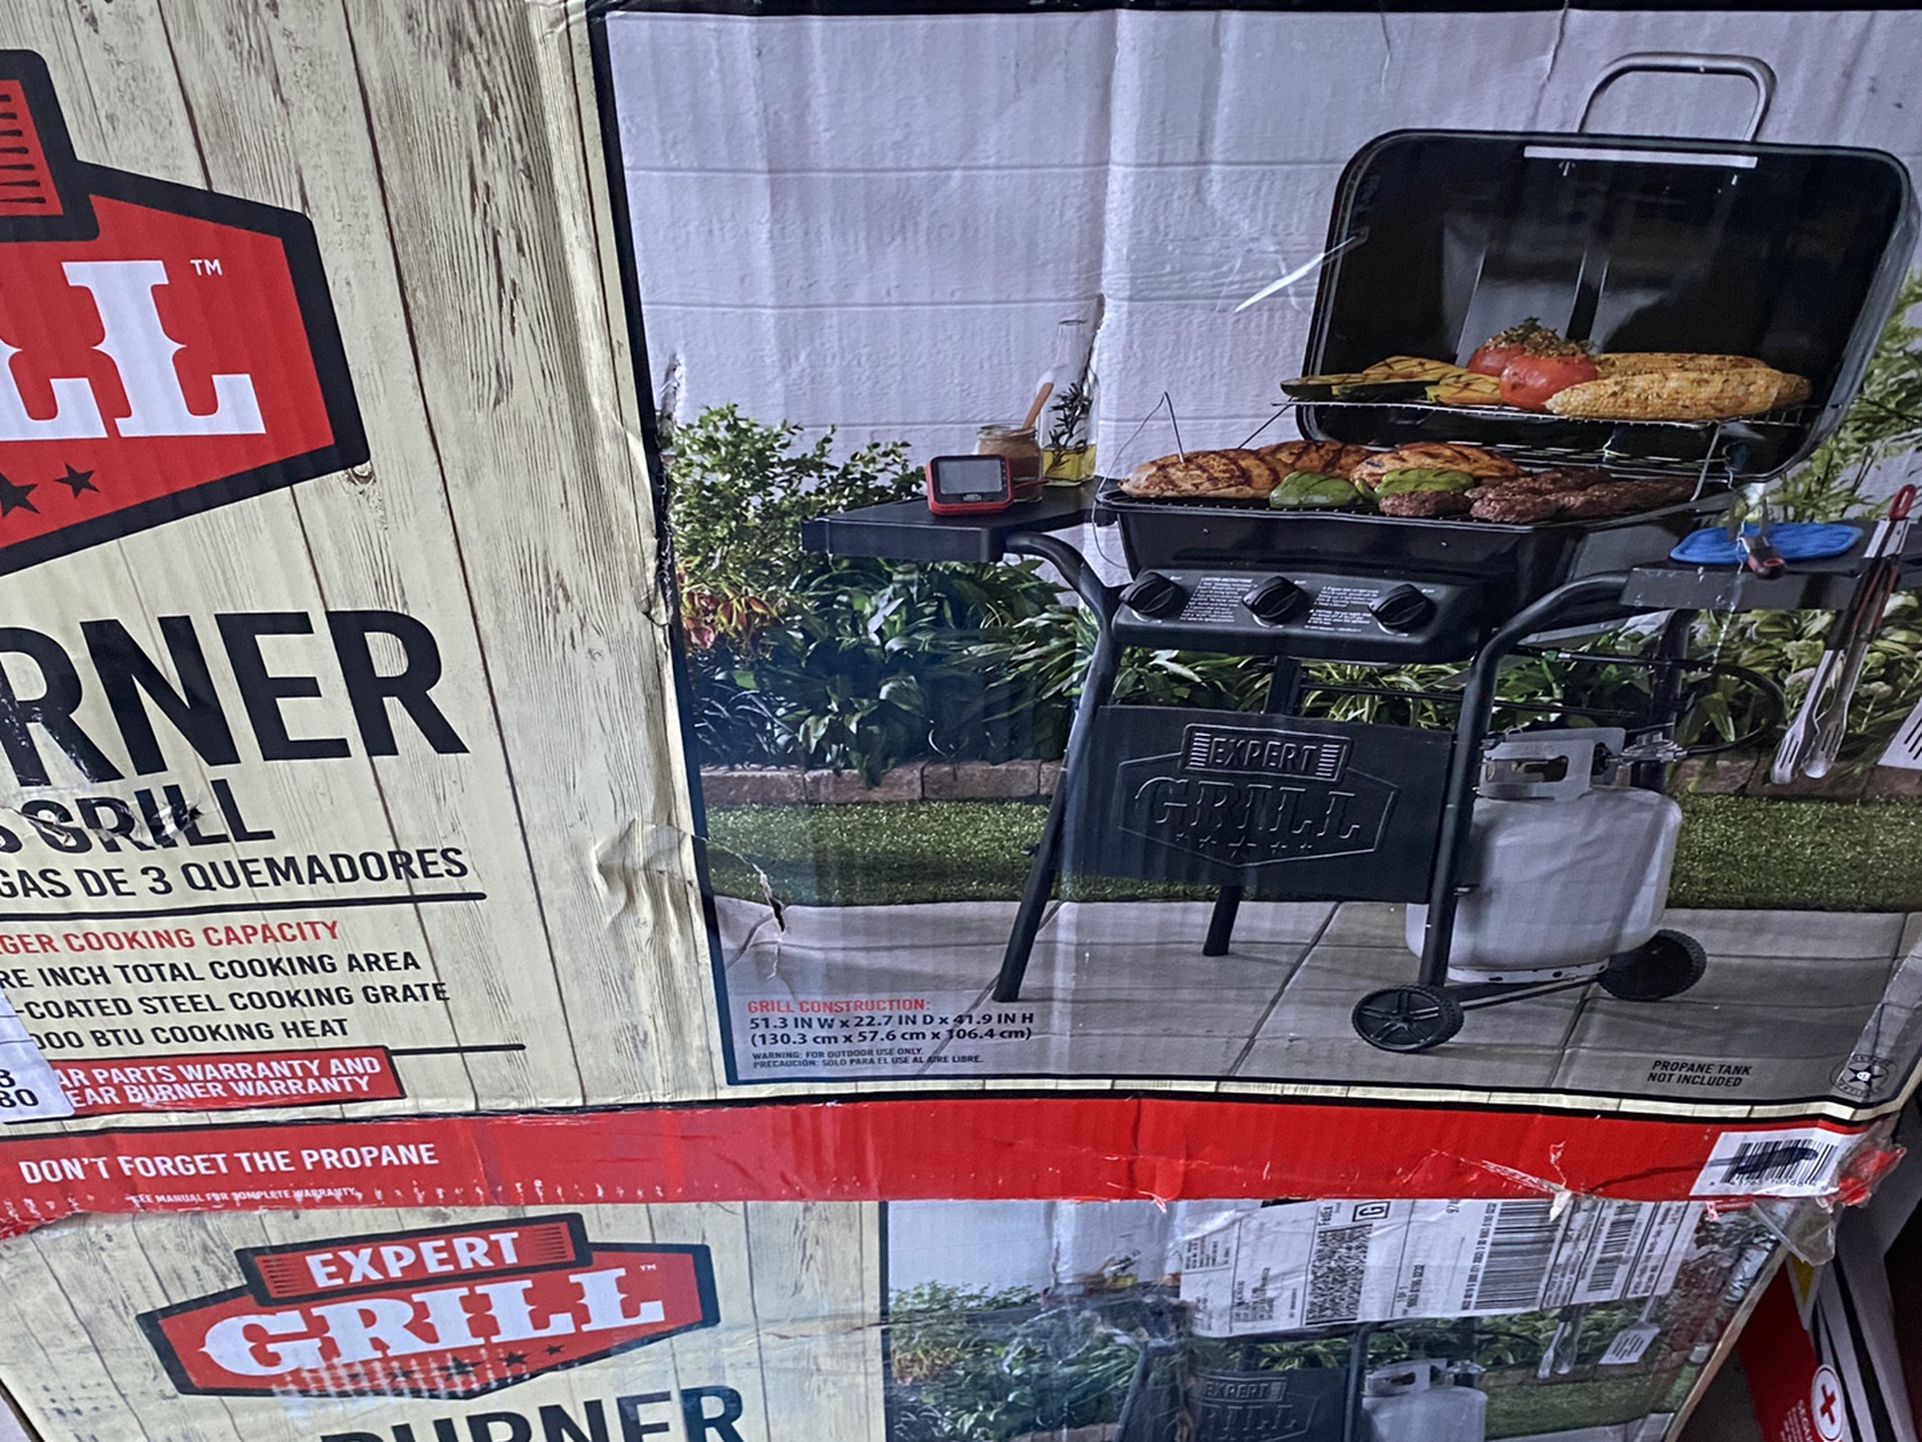 Expert Grill 3 - Burner Gas Grill